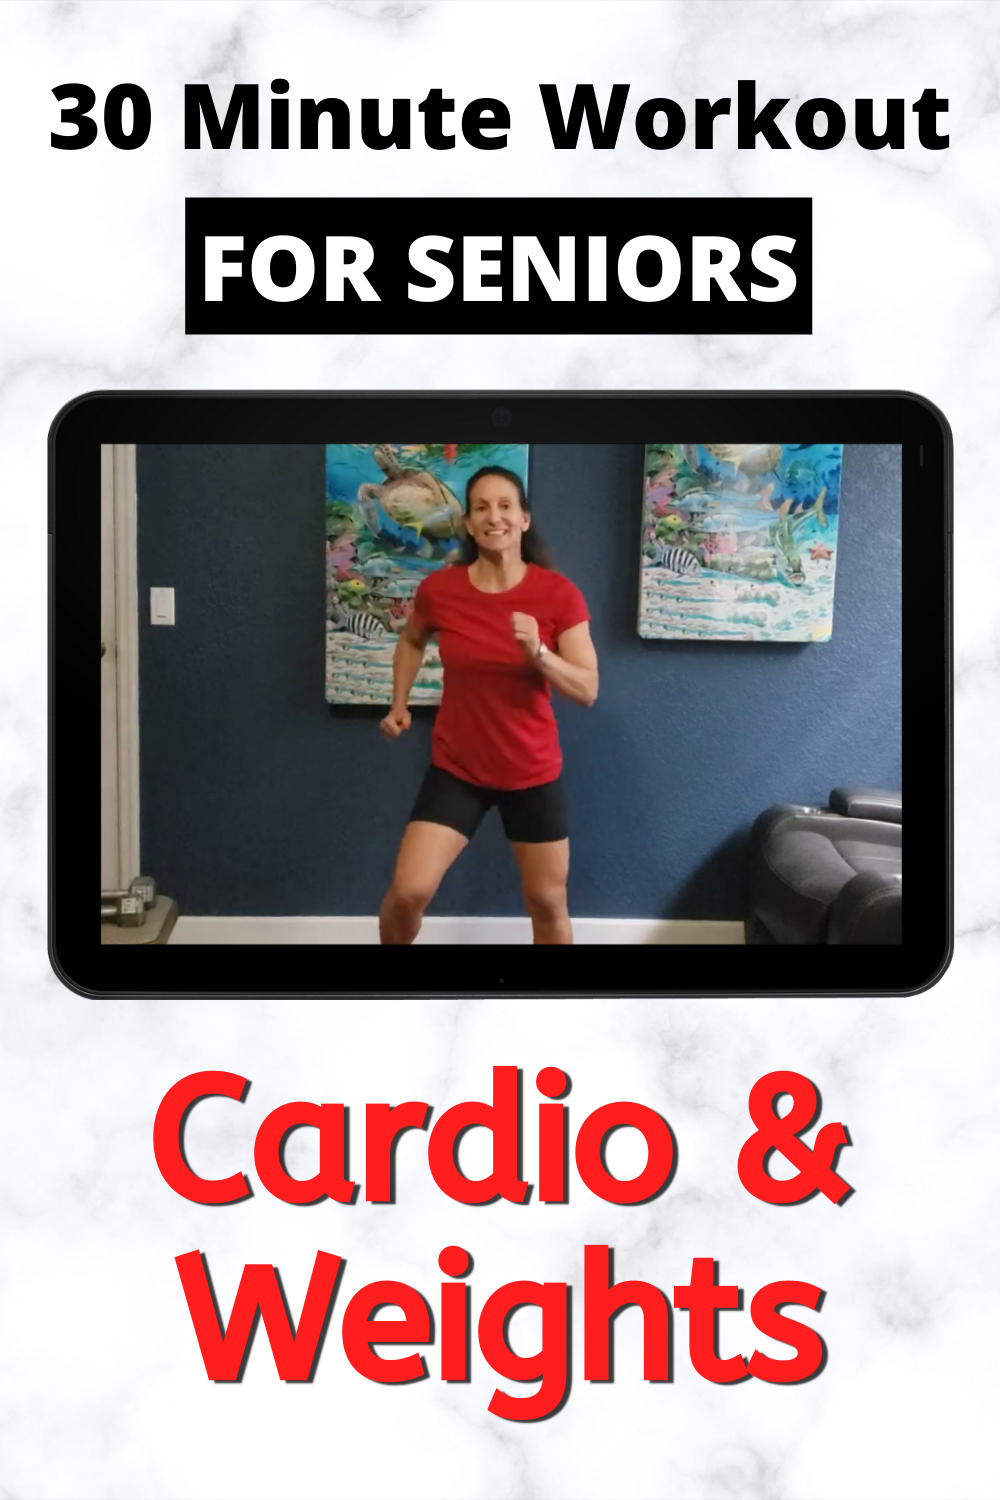 30 Minute Cardio & Weights Workout Video For Seniors